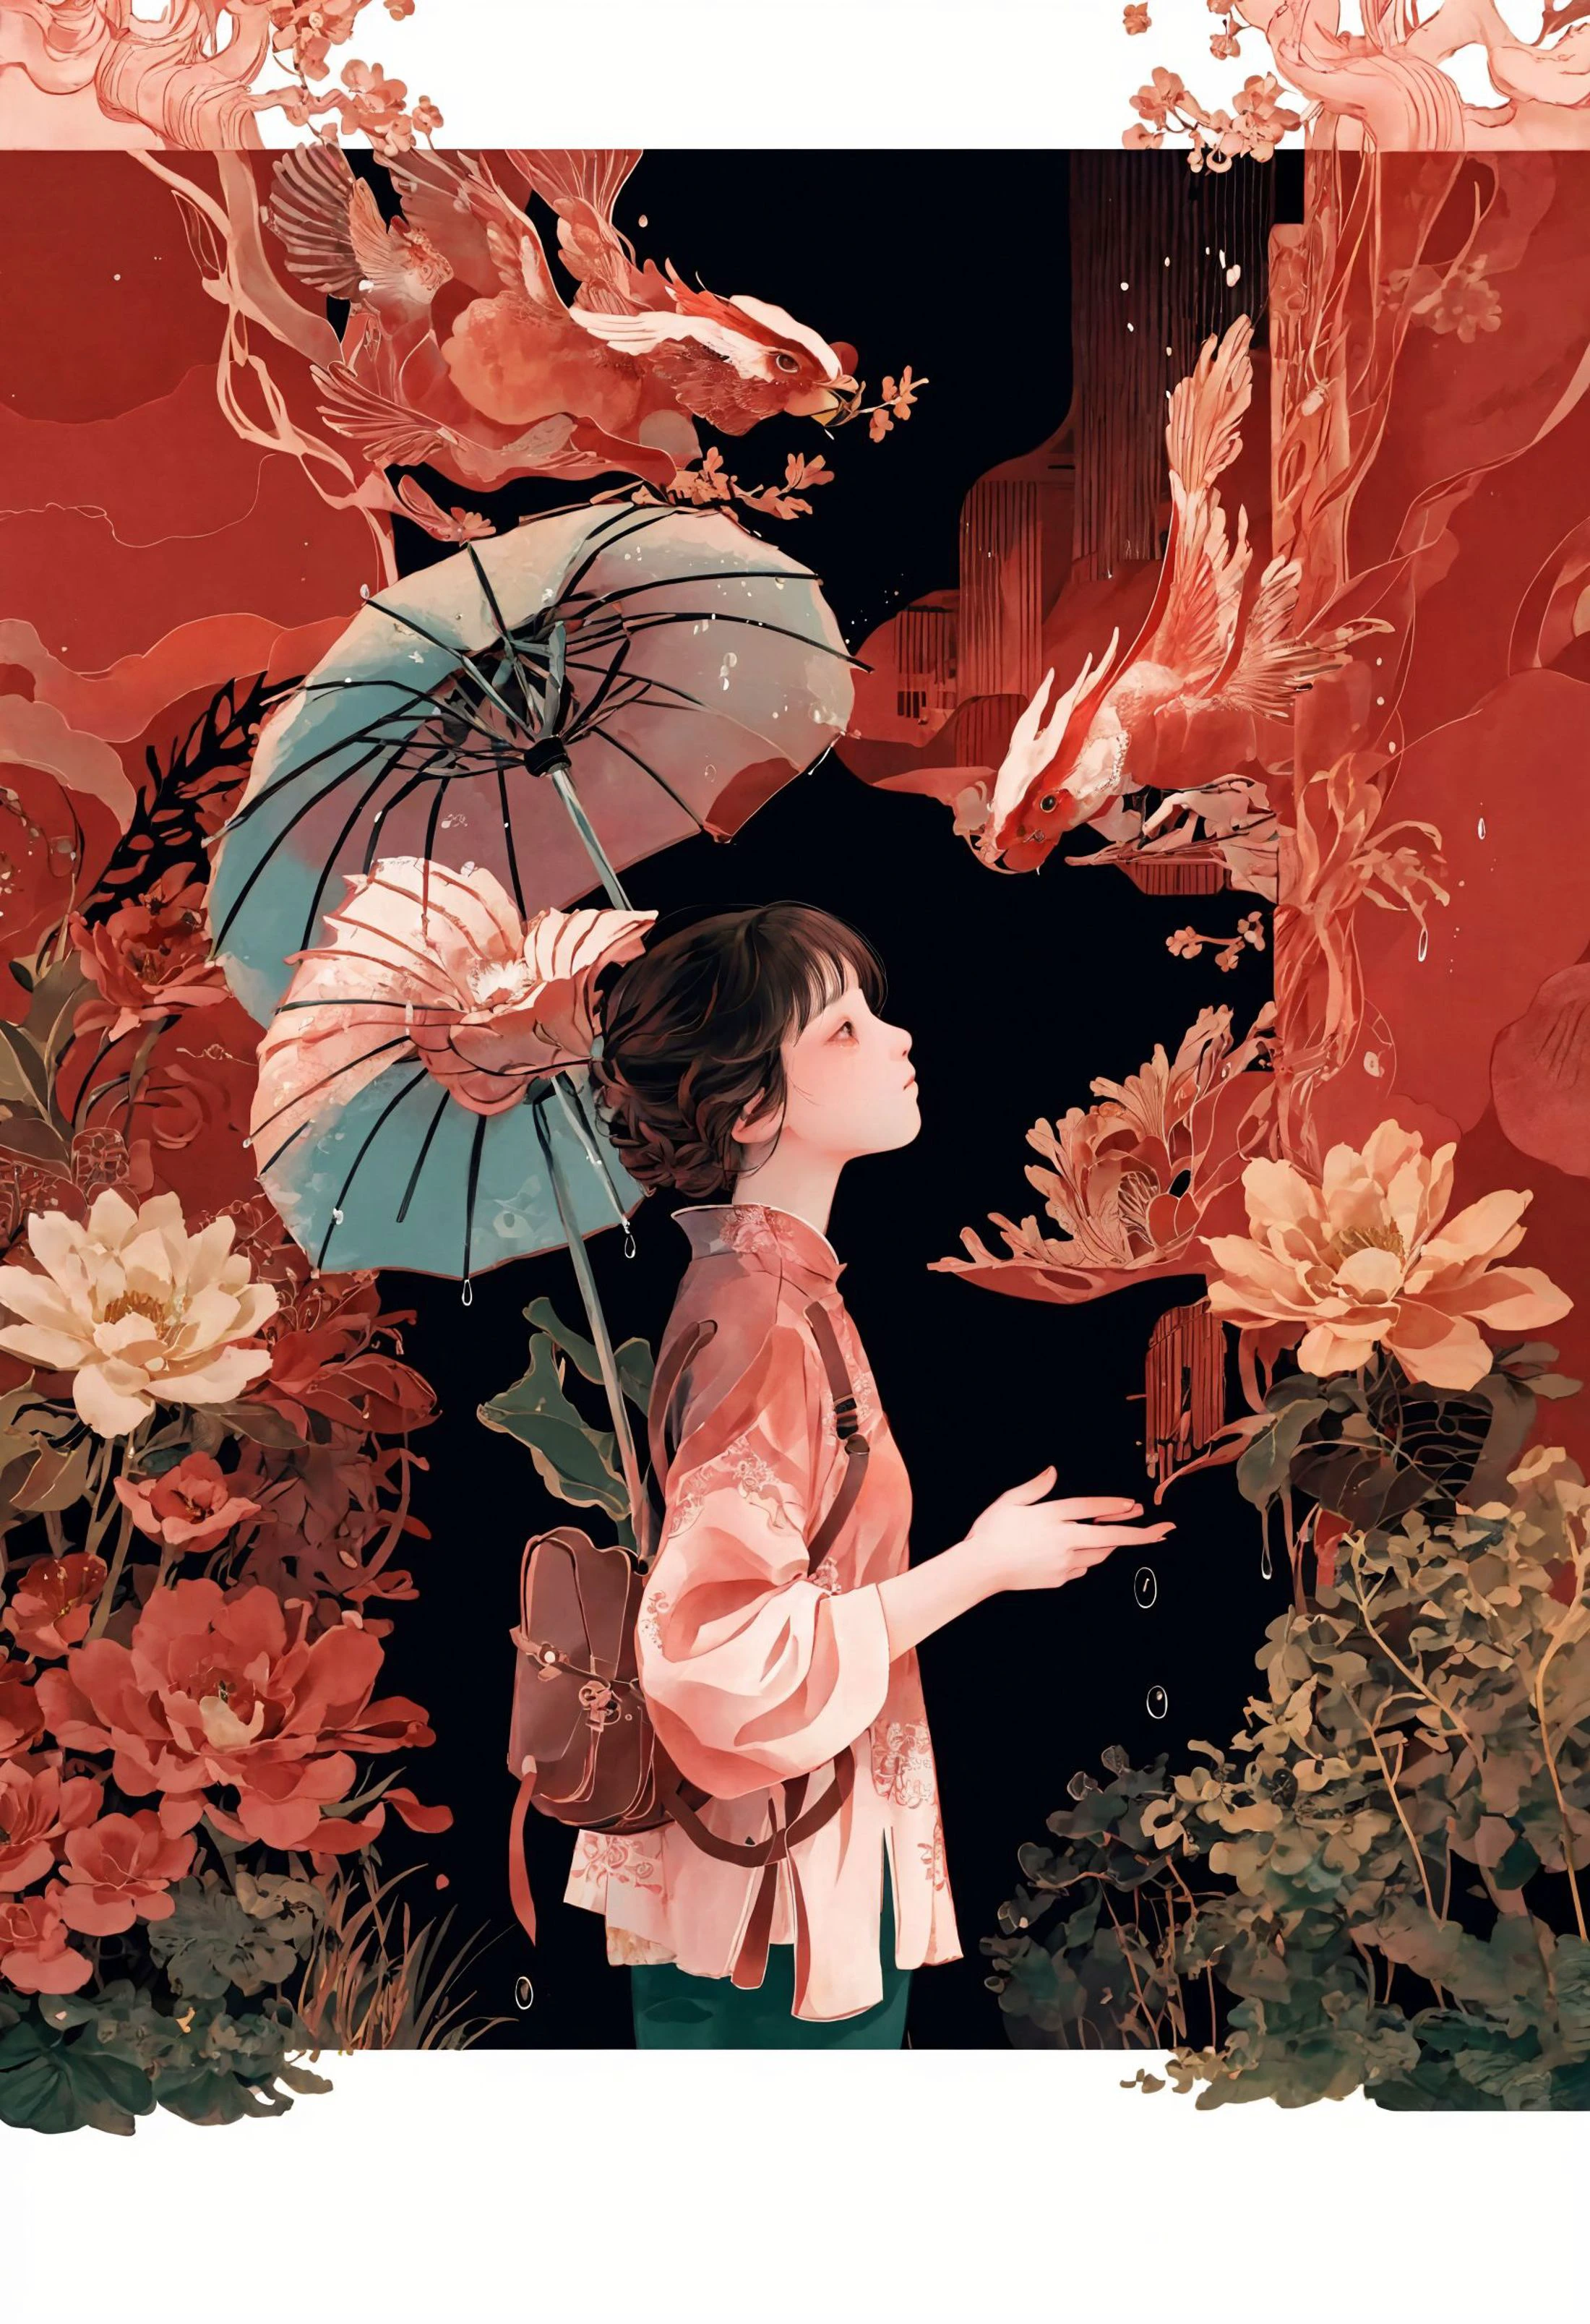 cinematic still In this evocative Wong Kar-wai-styled wuxia illustration,a solitary female warrior stands amidst a desolate,rain-slicked alleyway,the ambient light casting her shadow long and forlorn against the ancient walls. Her traditional garb is a blend of deep,muted tones,harmonizing with the surrounding twilight. Her posture is one of subdued power,with a sword hanging by her side,its presence as quiet as her solitude. Her gaze is lost in the distance,reflecting a poignant loneliness,characteristic of Wong's exploration of isolation within his films. The scene's saturated hues,the interplay of light and shadow,and the slow,deliberate framing create a mood that is both introspective and cinematic,capturing the essence of a wuxia heroine's inner turmoil amidst the silence of the night.. emotional,harmonious,vignette,4k epic detailed,shot on kodak,35mm photo,sharp focus,high budget,cinemascope,moody,epic,gorgeous,film grain,grainy,colorful,extremely cute,